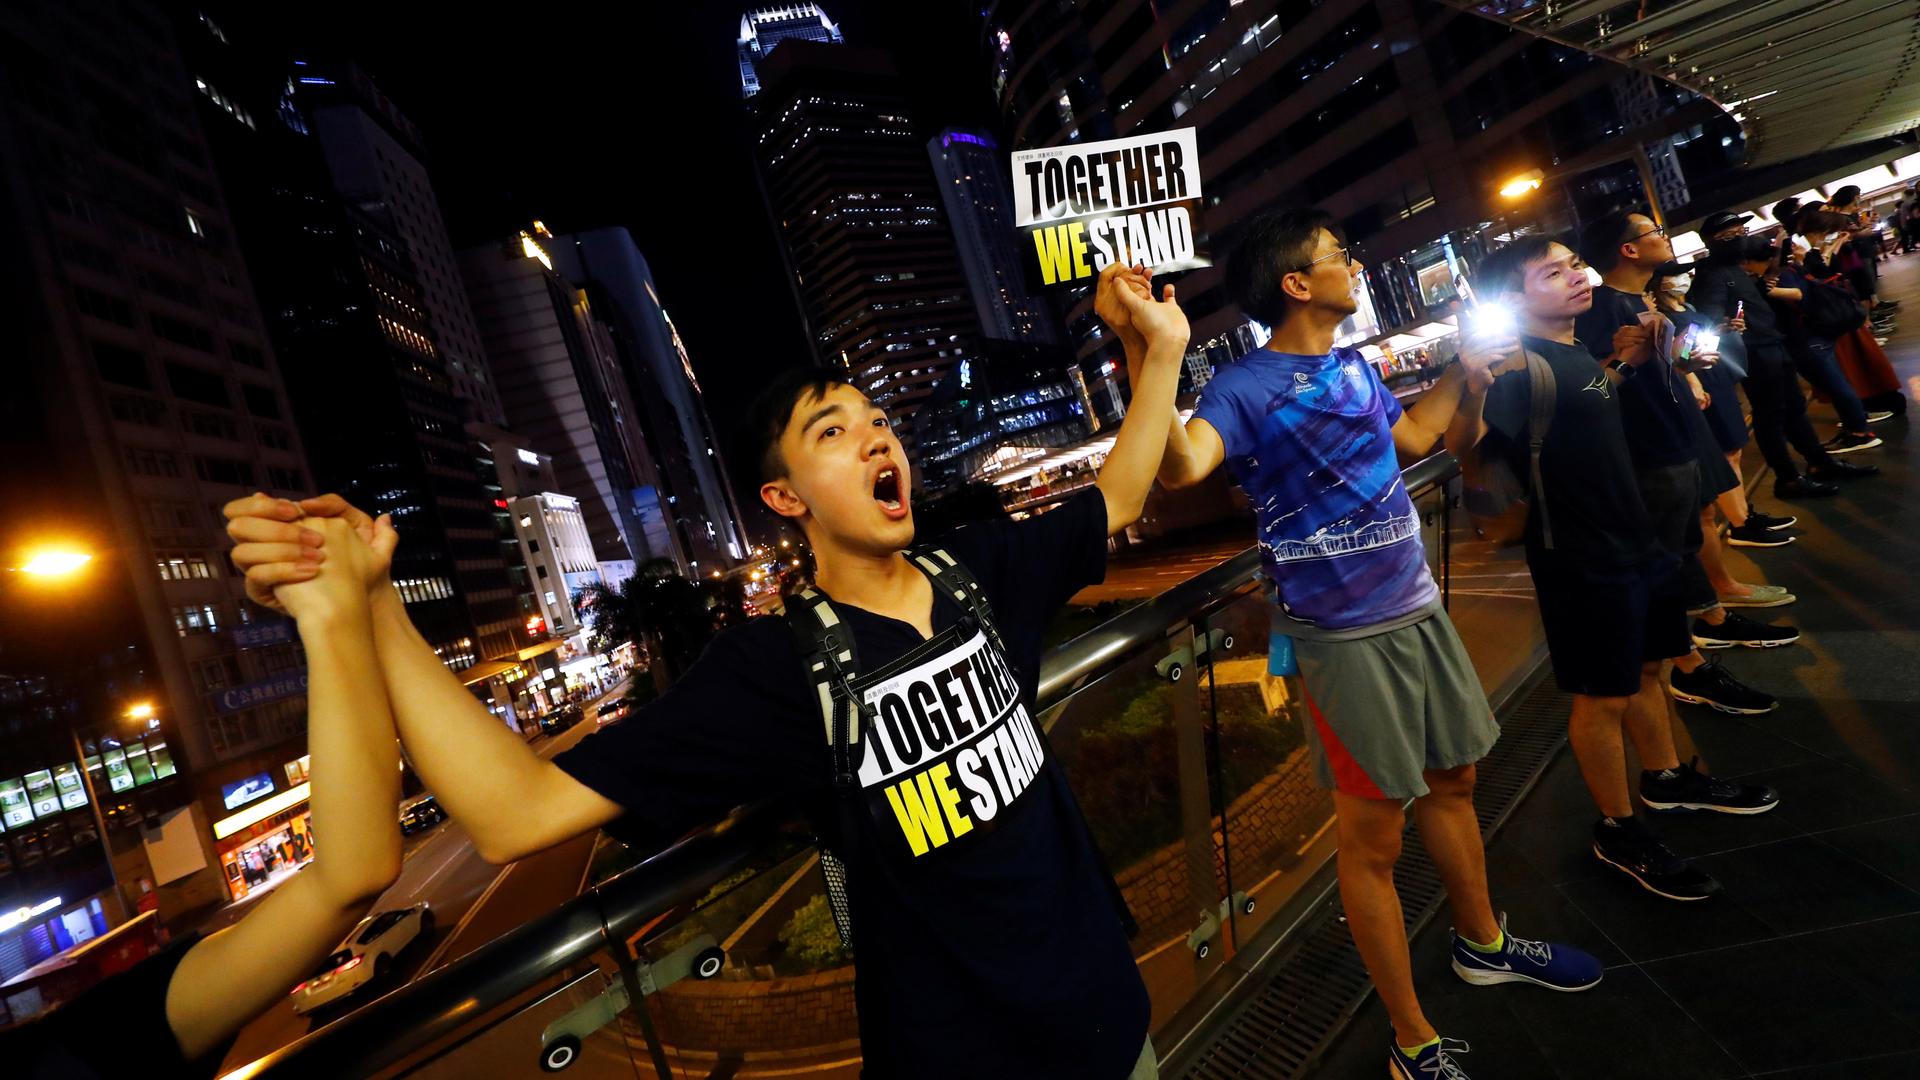 People stand holding hands and signs reading 'together we stand' in front of a nighttime cityscape